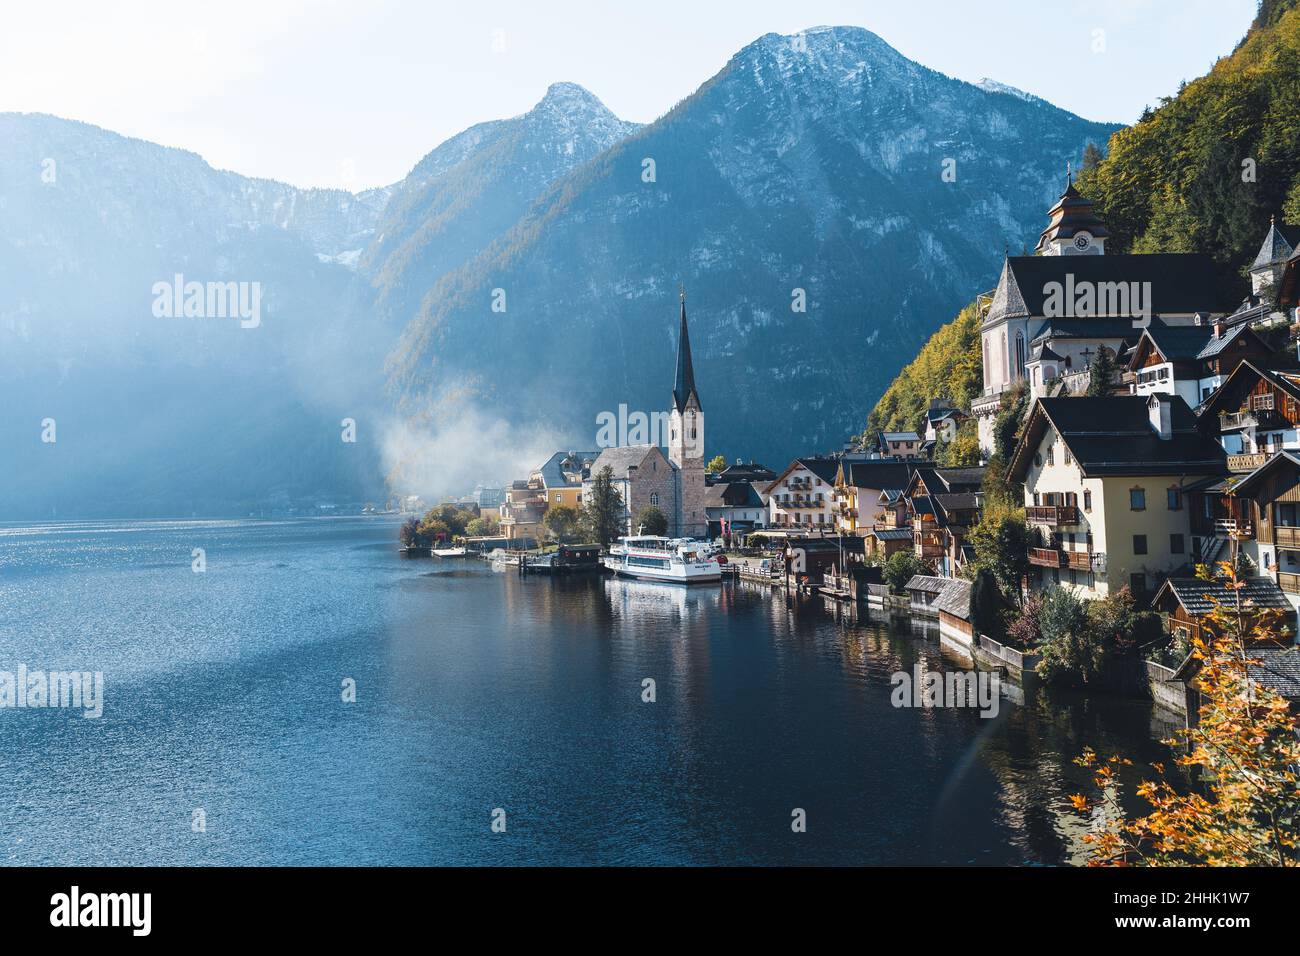 Picturesque view of small village located near calm lake surrounded by high mountains covered with coniferous forest in autumn sunny day in Austria ne Stock Photo